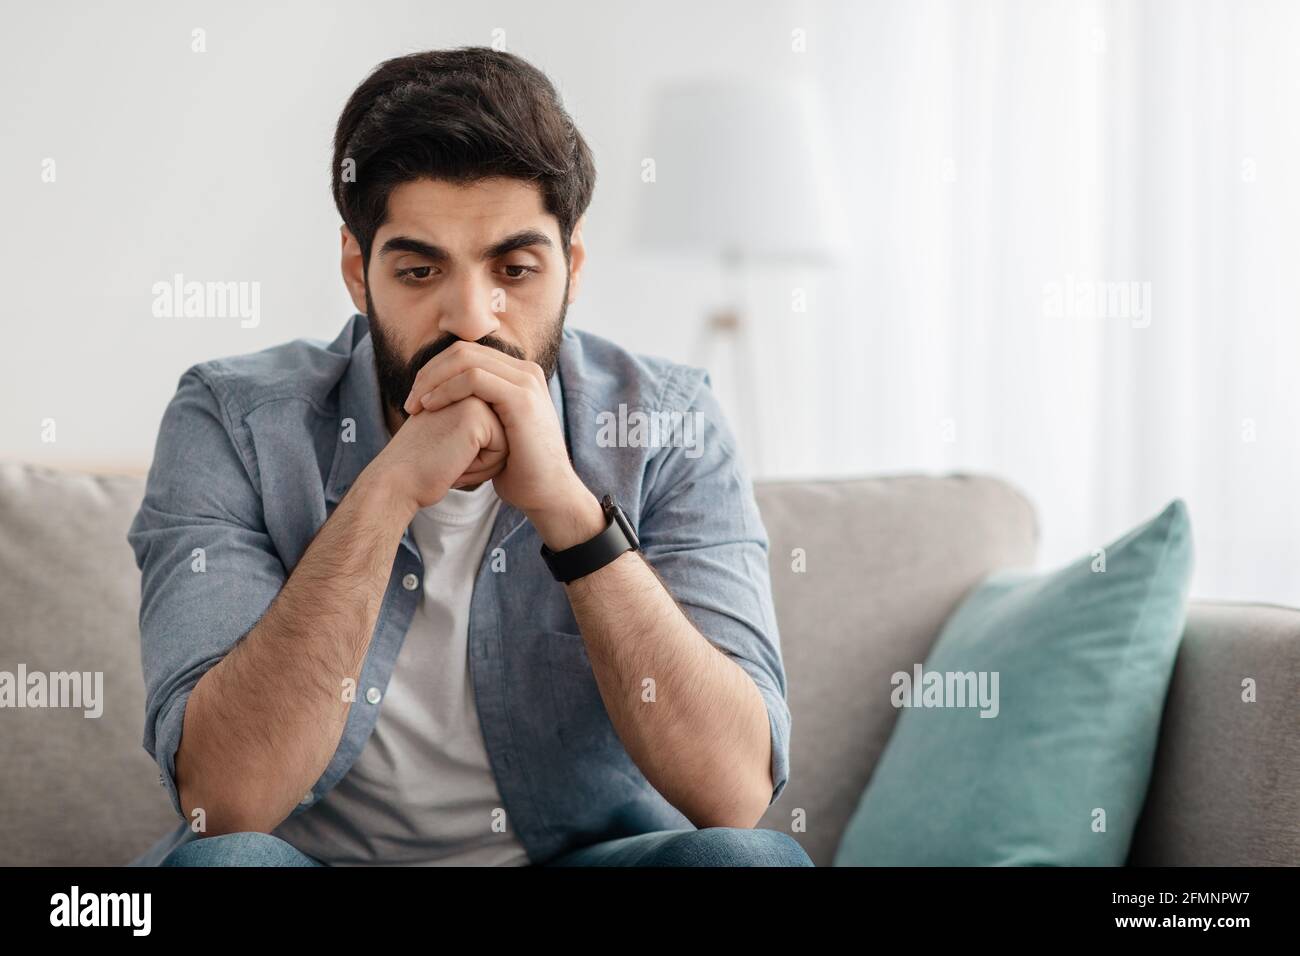 Depressed arab man having problems, thinking while sitting on couch at home, empty space Stock Photo